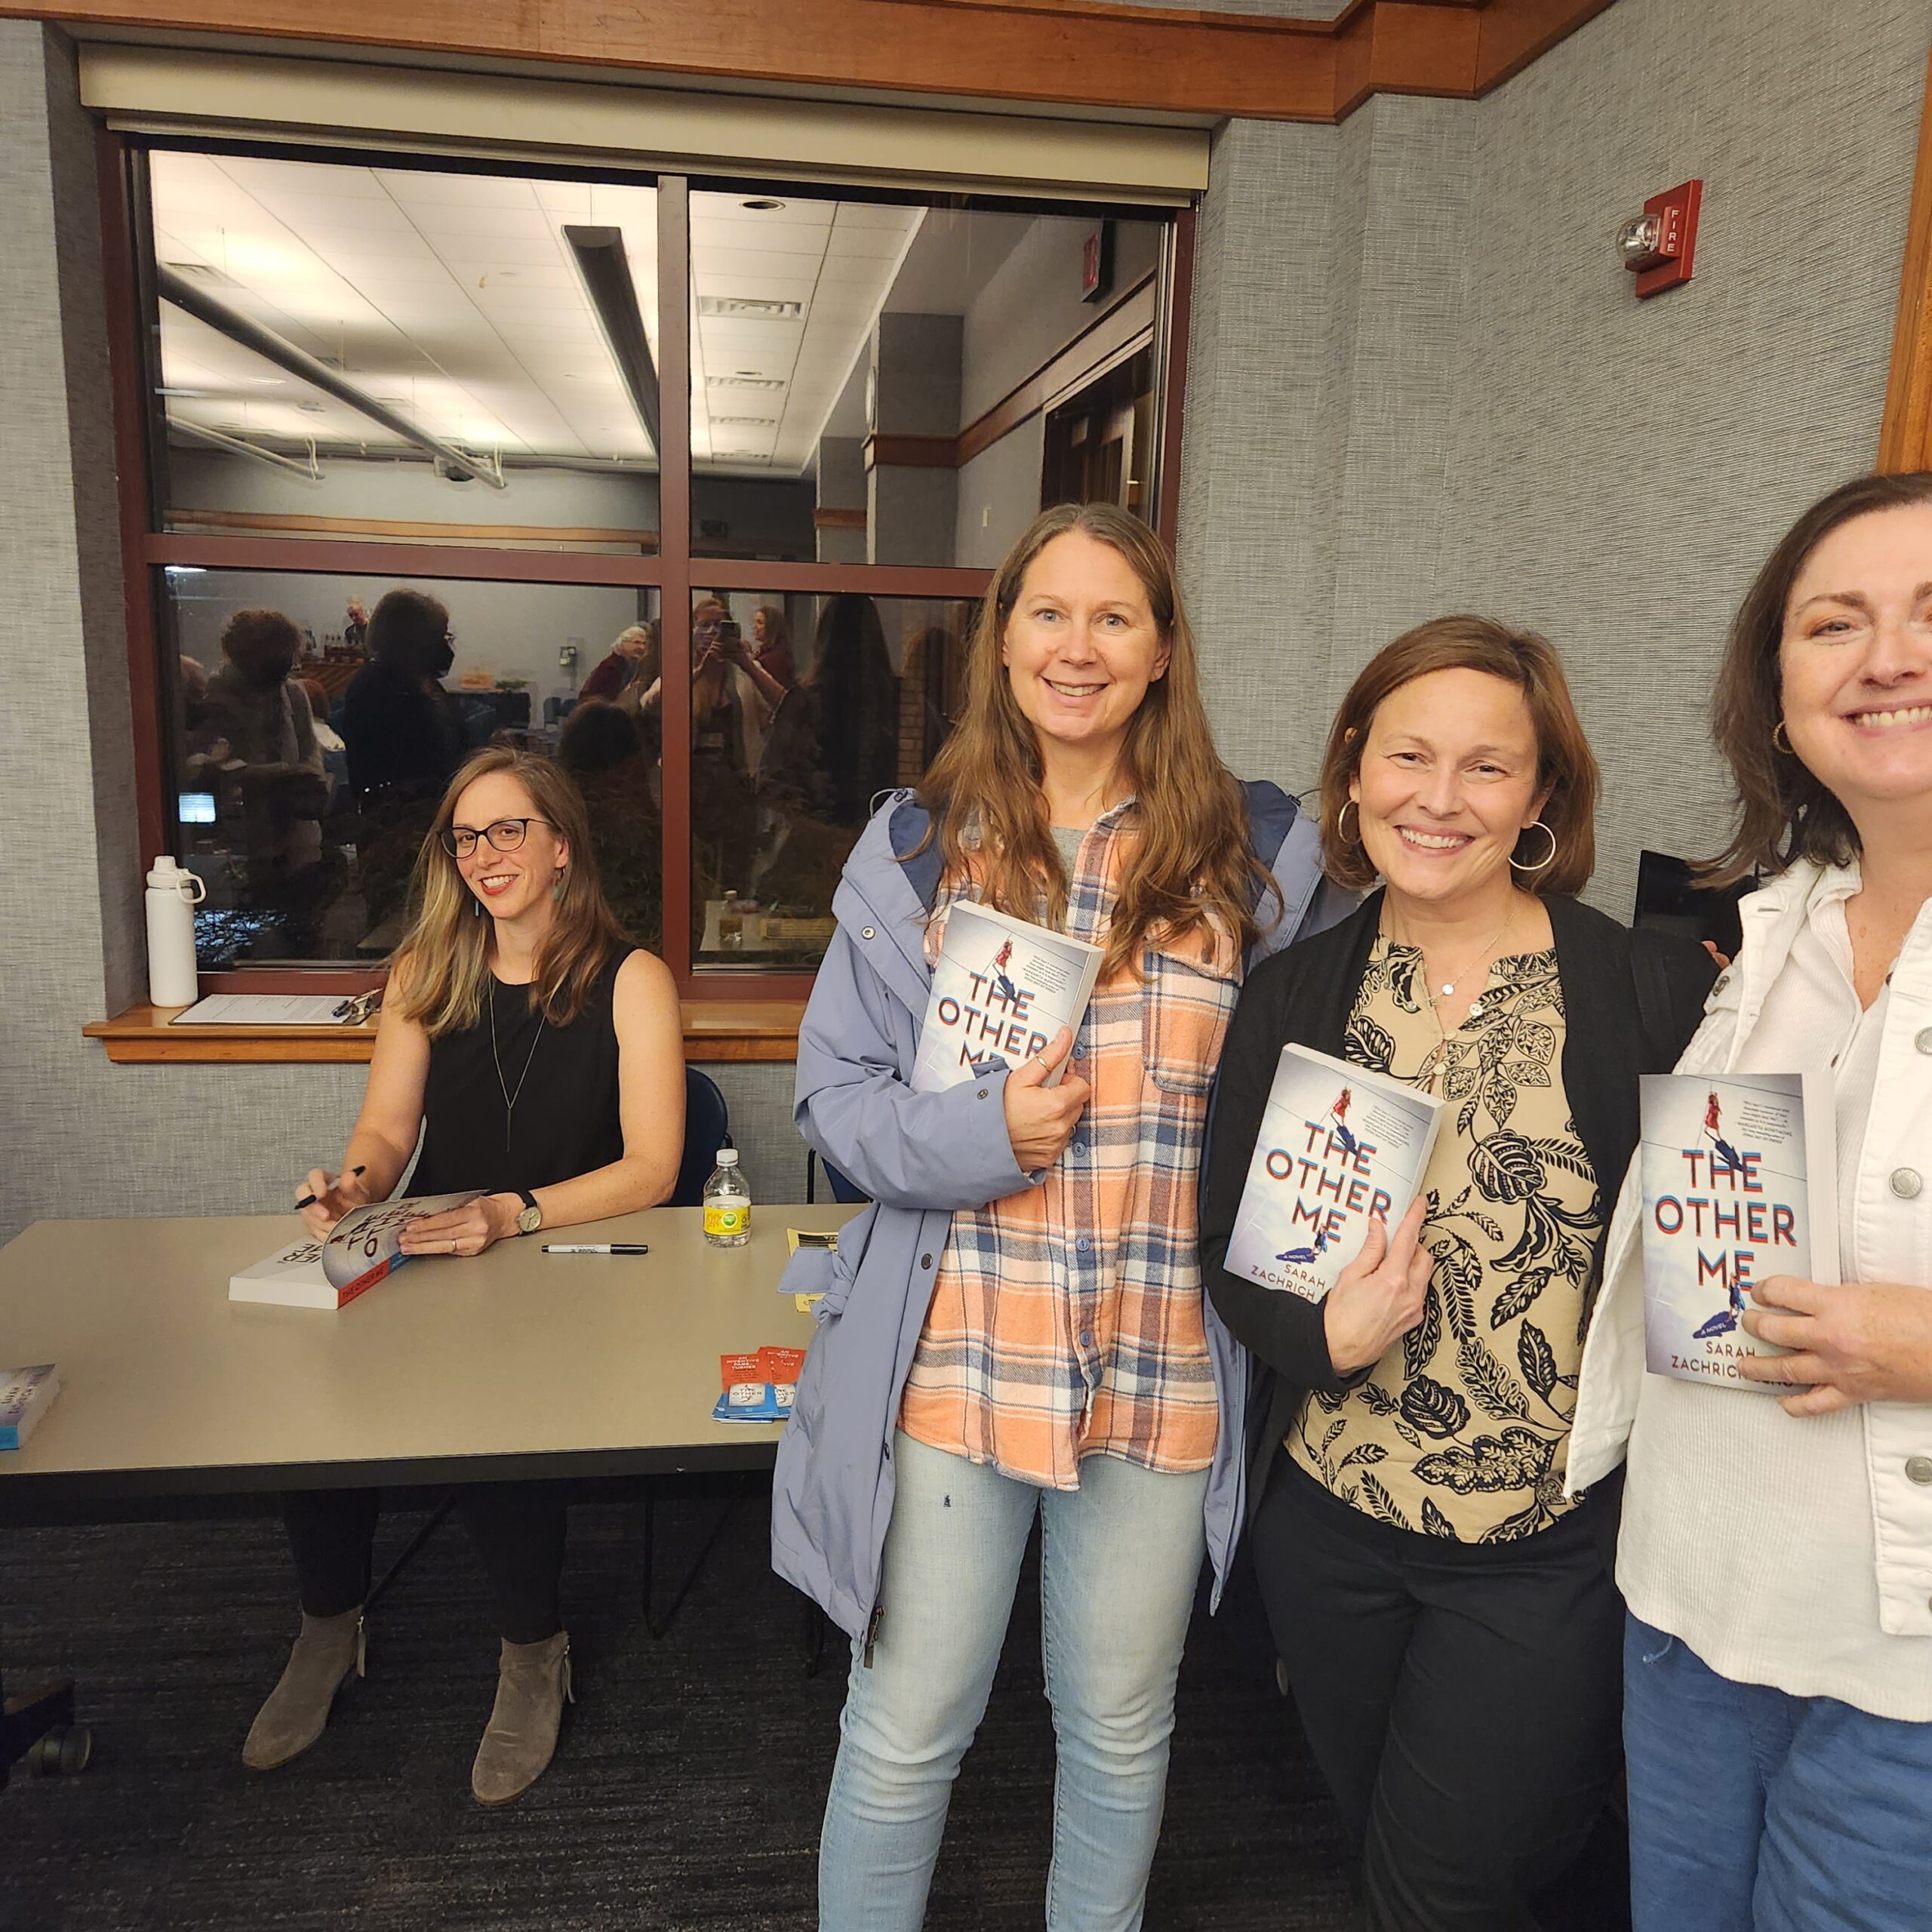 Adults hold copies of book The Other Me while the author signs another copy